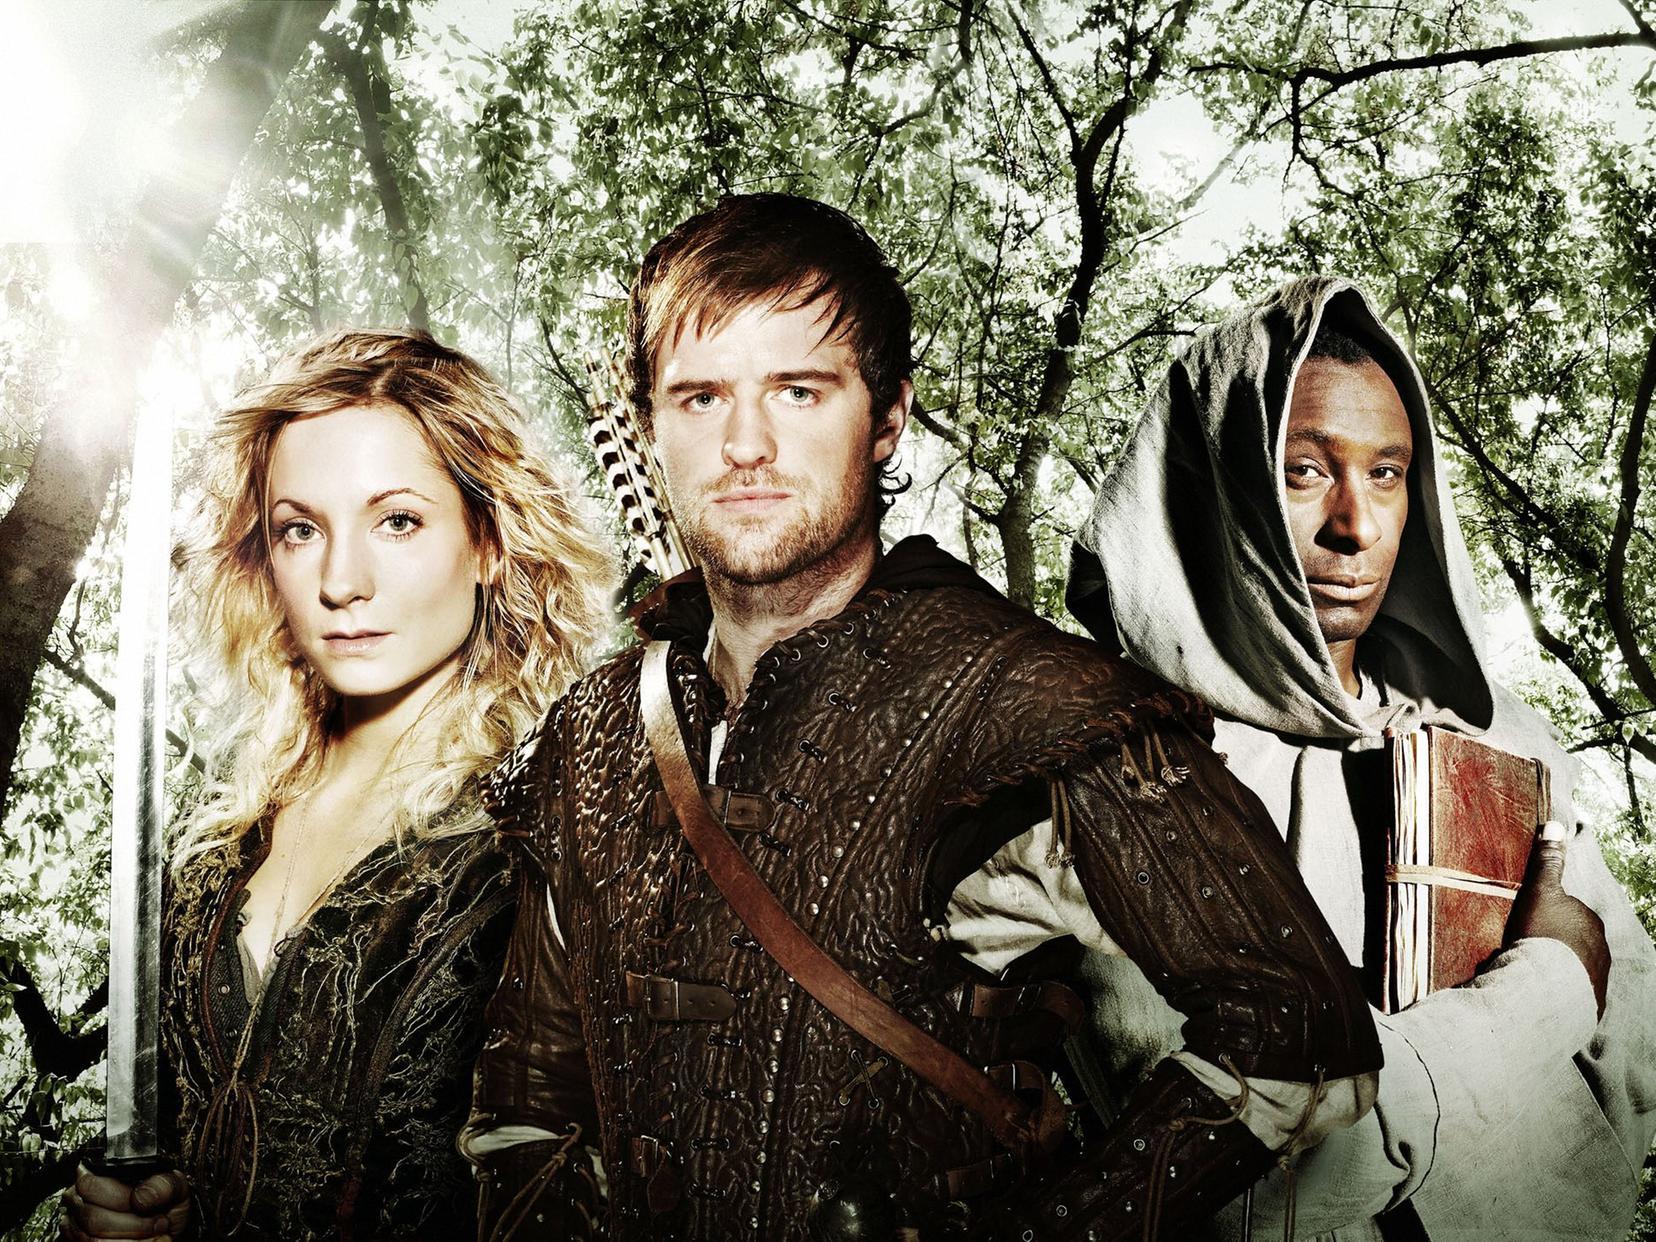 In 2009 she played the role of Kate of Locksley in 11 episodes of the BBC series Robin Hood.